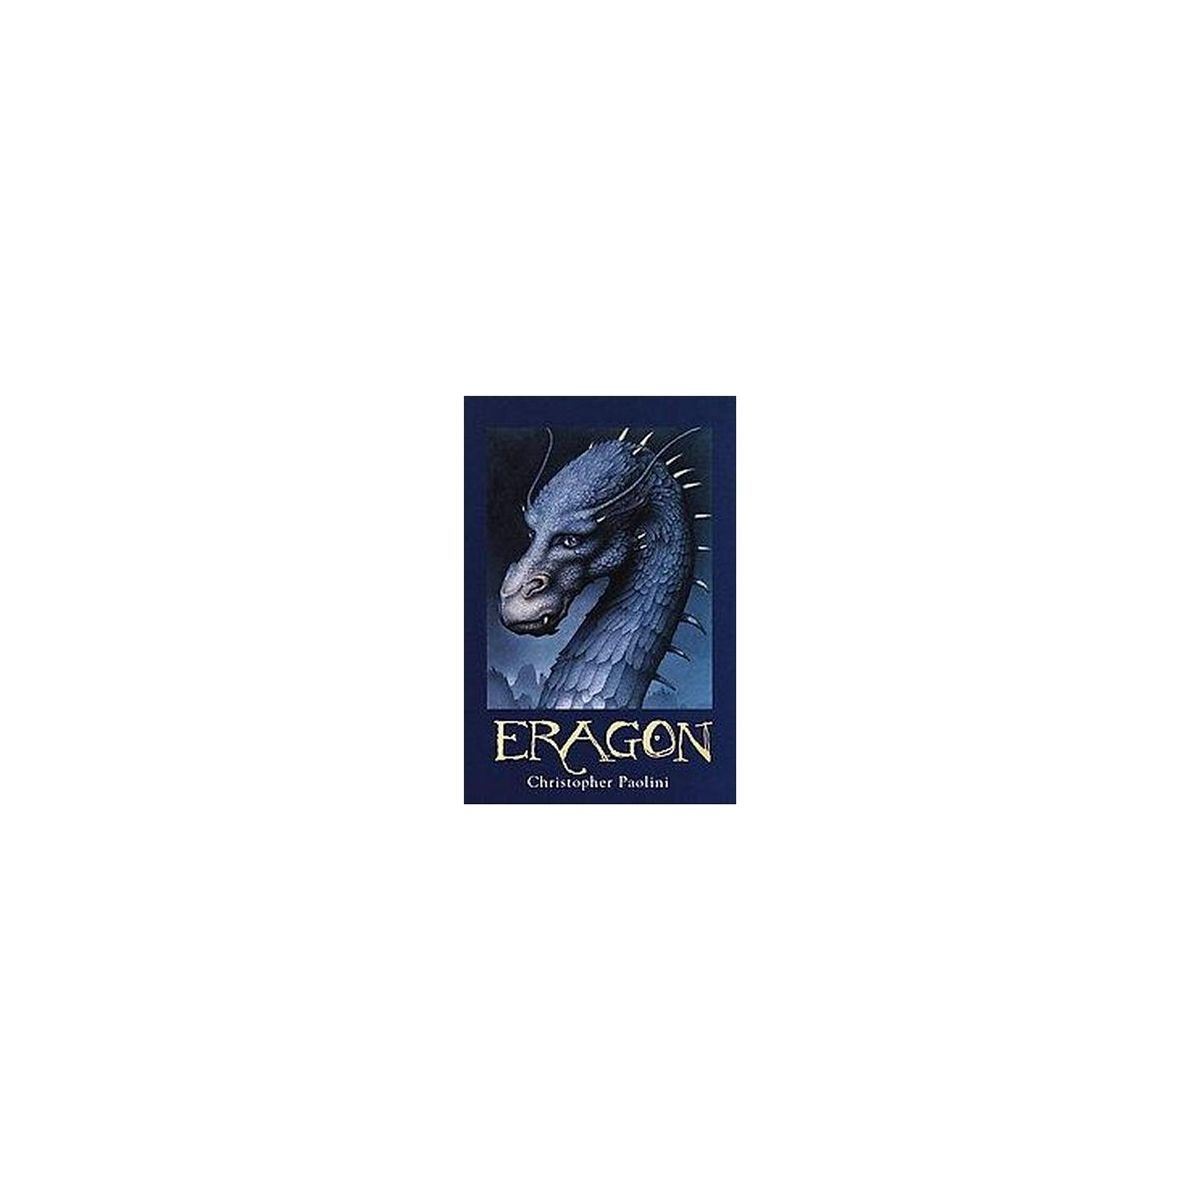 Eragon ( Inheritance Cycle) (Hardcover) by Christopher Paolini | Target